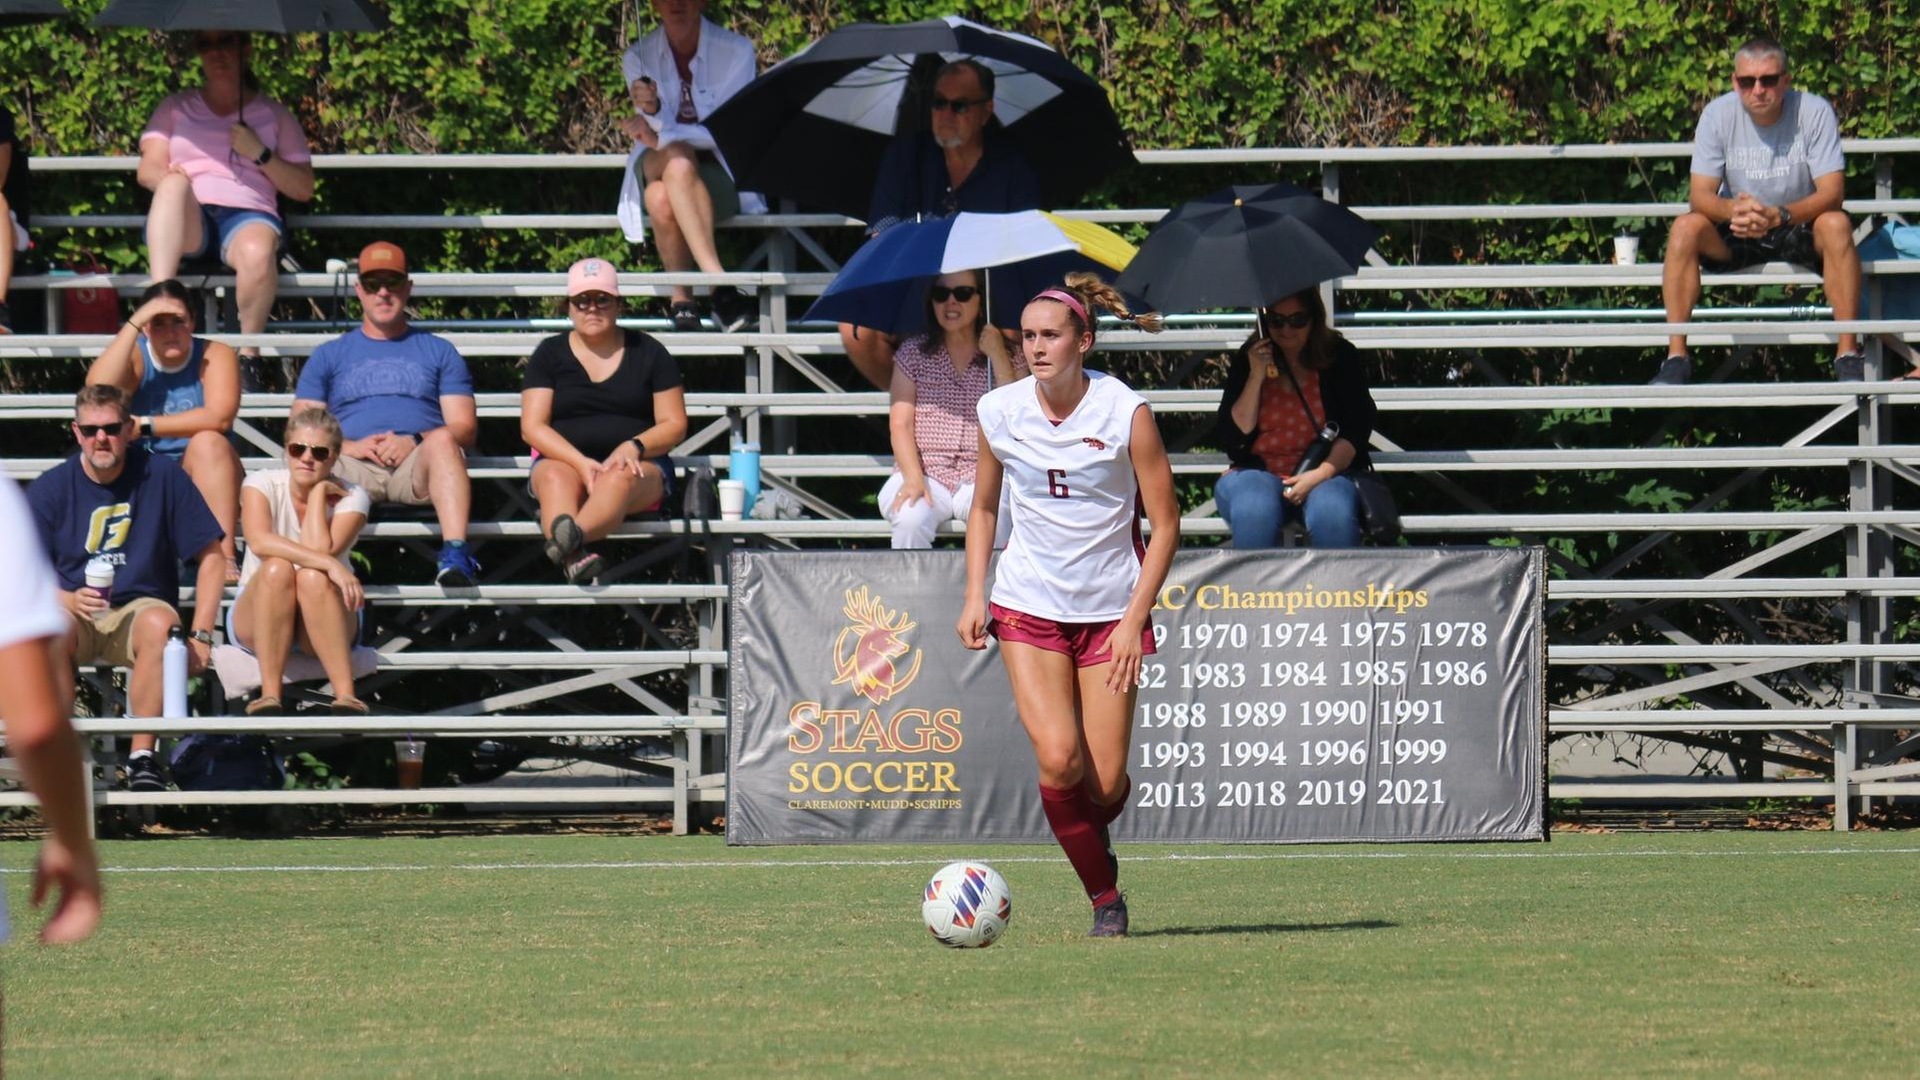 Annie McKinley had the game-winner for CMS in the 62nd minute